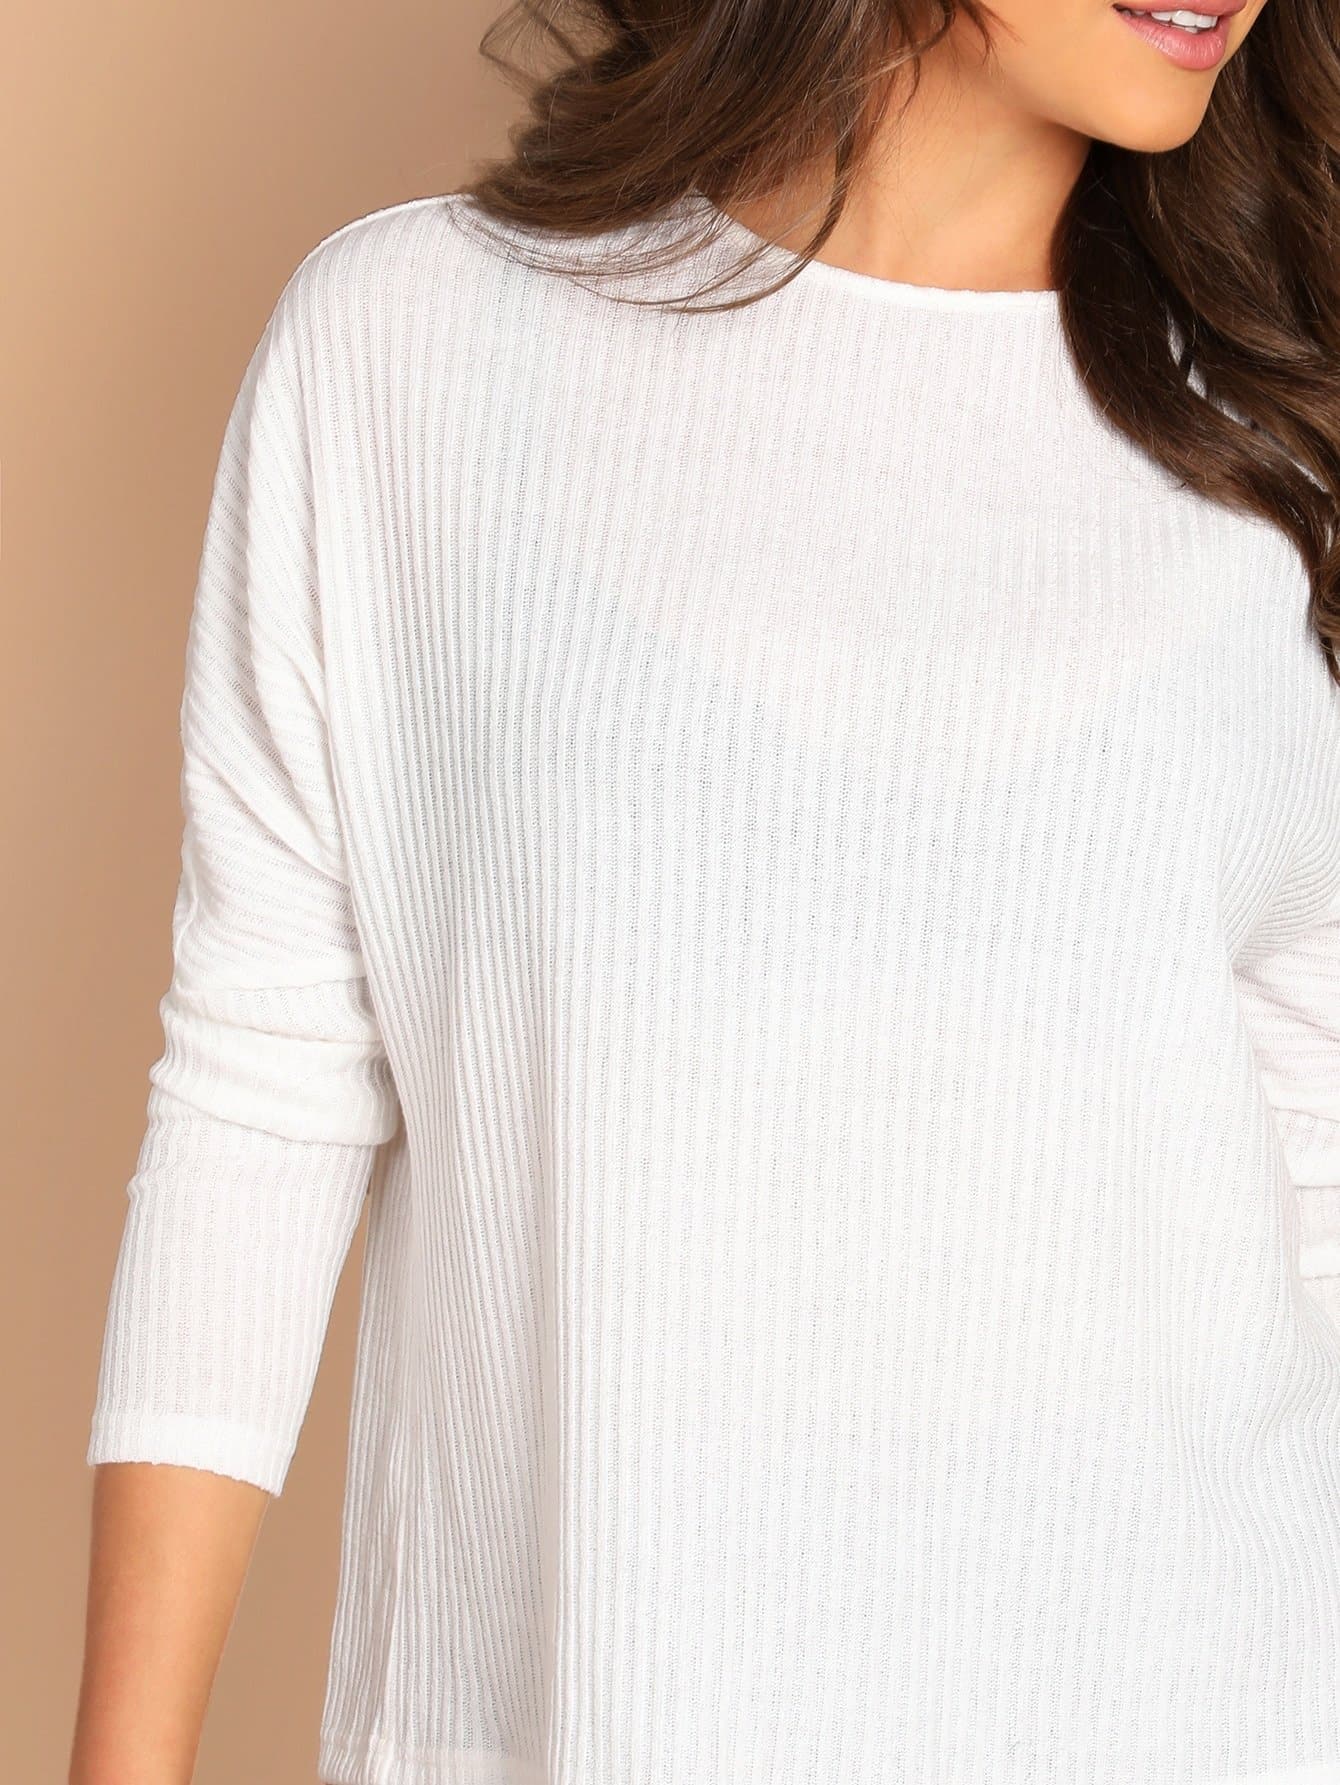 White Long Sleeve Round Neck Solid Rib-Knit Pullover